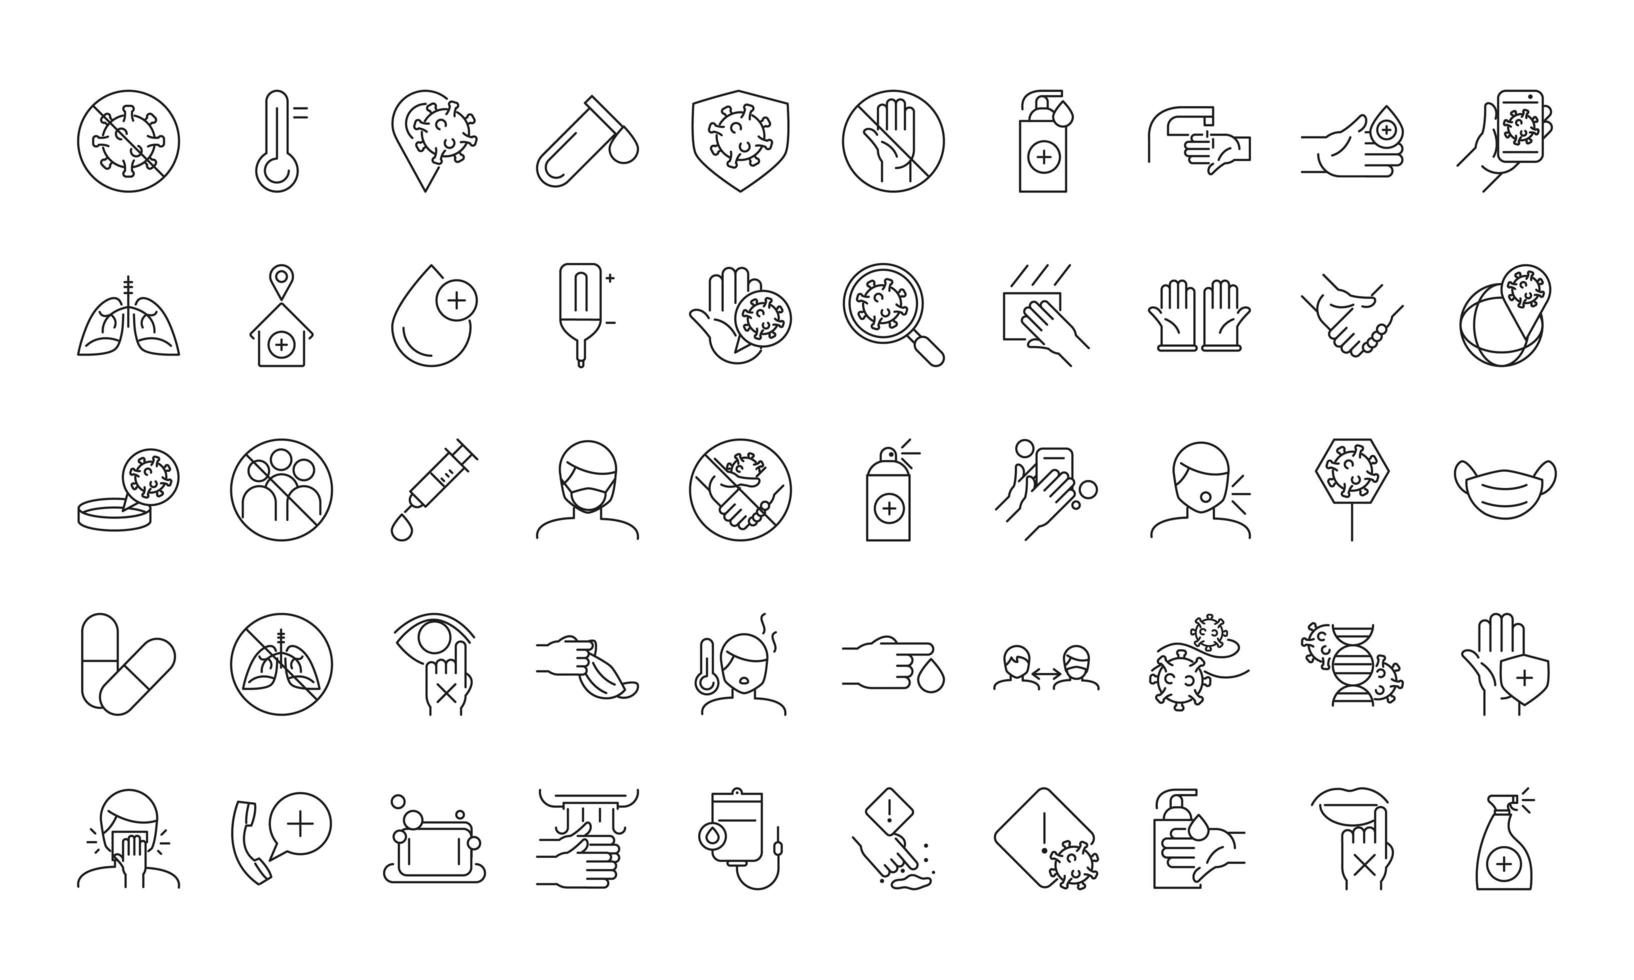 Health care instructions for covid-19 icon set  vector